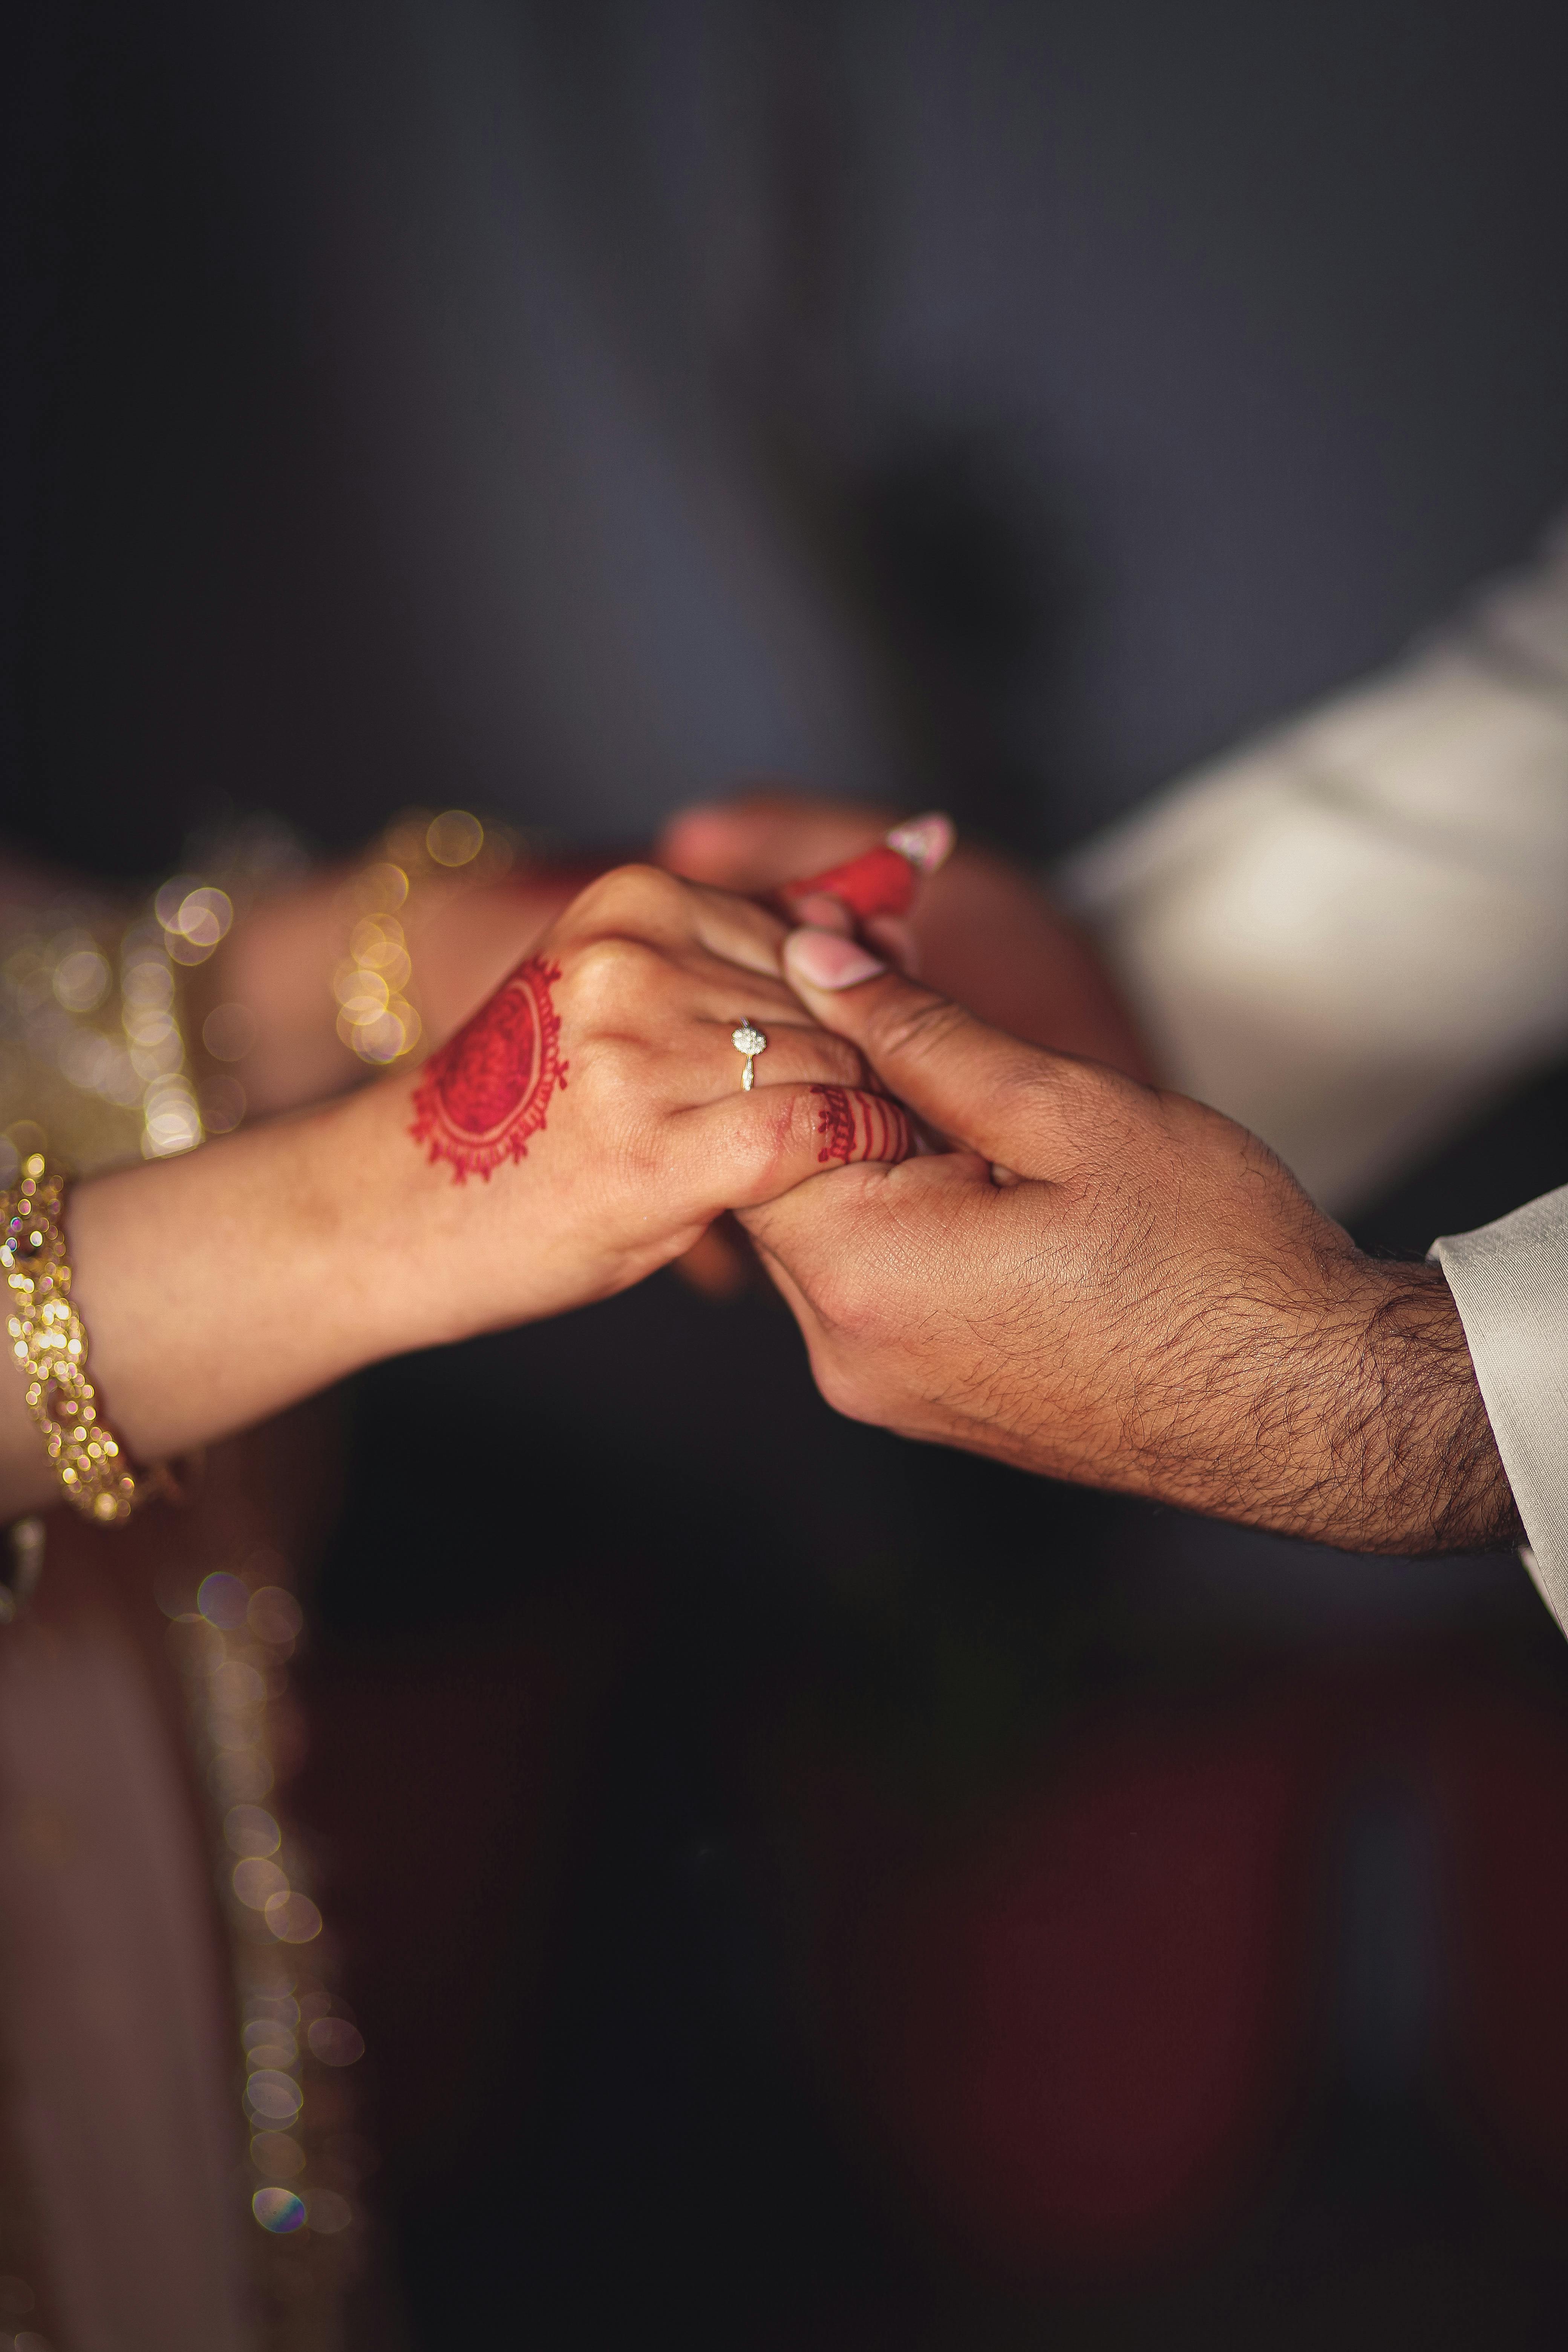 Woman wearing ring on man's hand on wedding ceremony close-up Stock Photo  by olegbreslavtsev